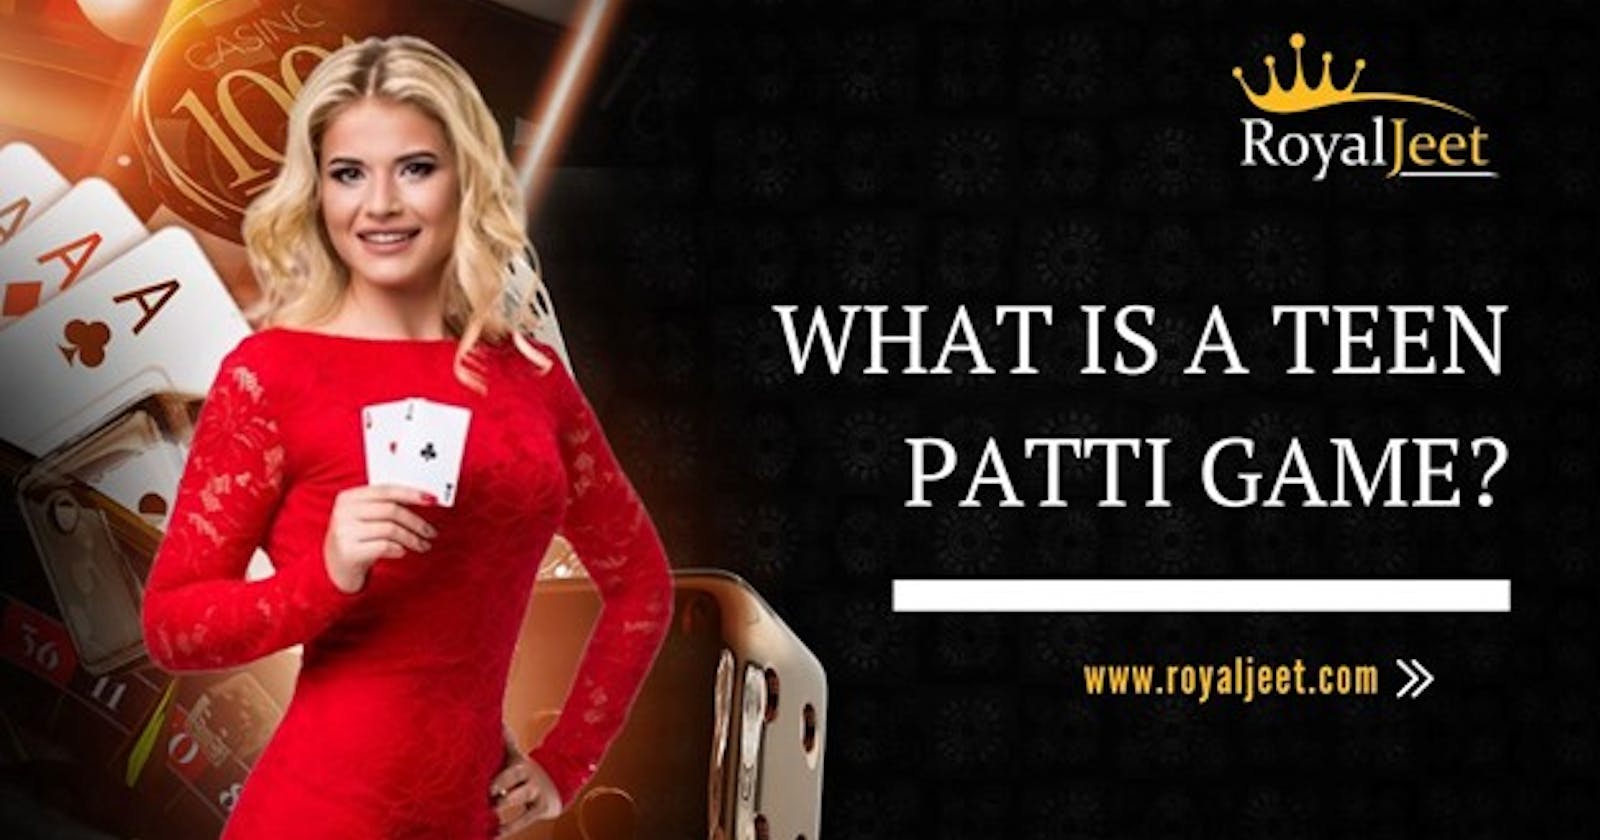 What is a Teen Patti Game?